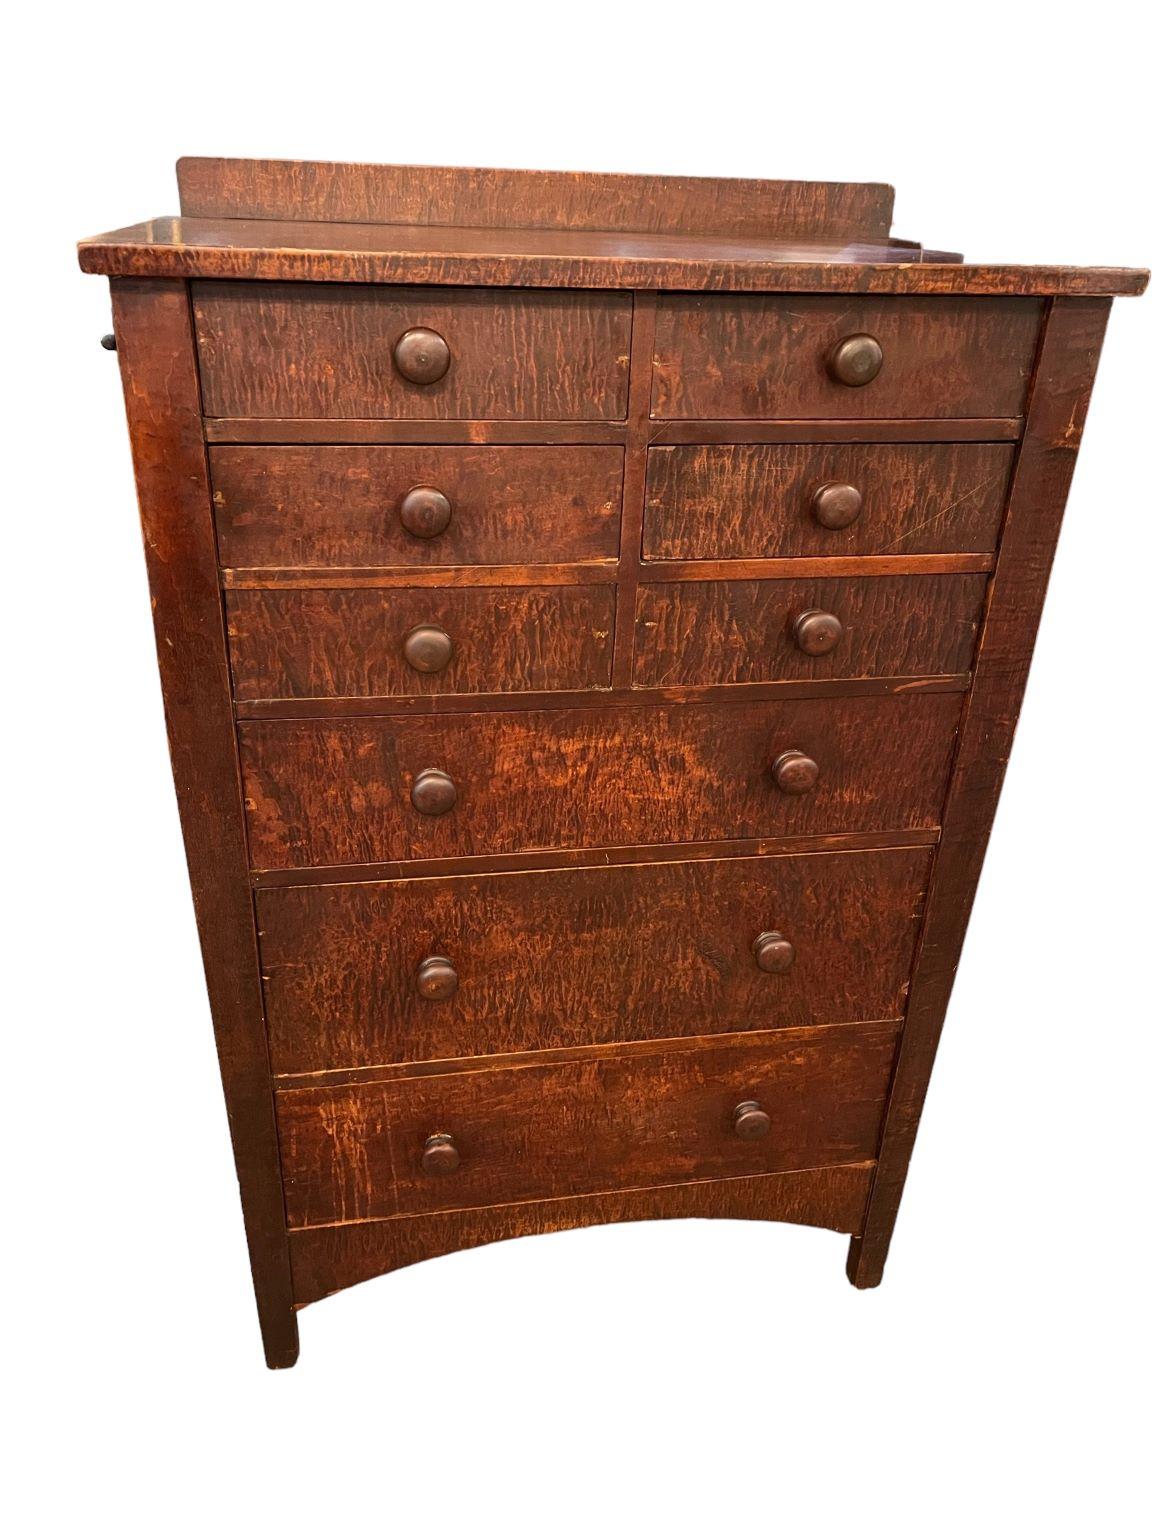 Beautiful Gustav Stickley nine drawer chest of drawers attributed to Harvey Ellis. A rare chest done in stained Curley Maple. Marked on back of chest with an early Gustav Stickley mark. A few small chips near bottom that does not diminish the beauty